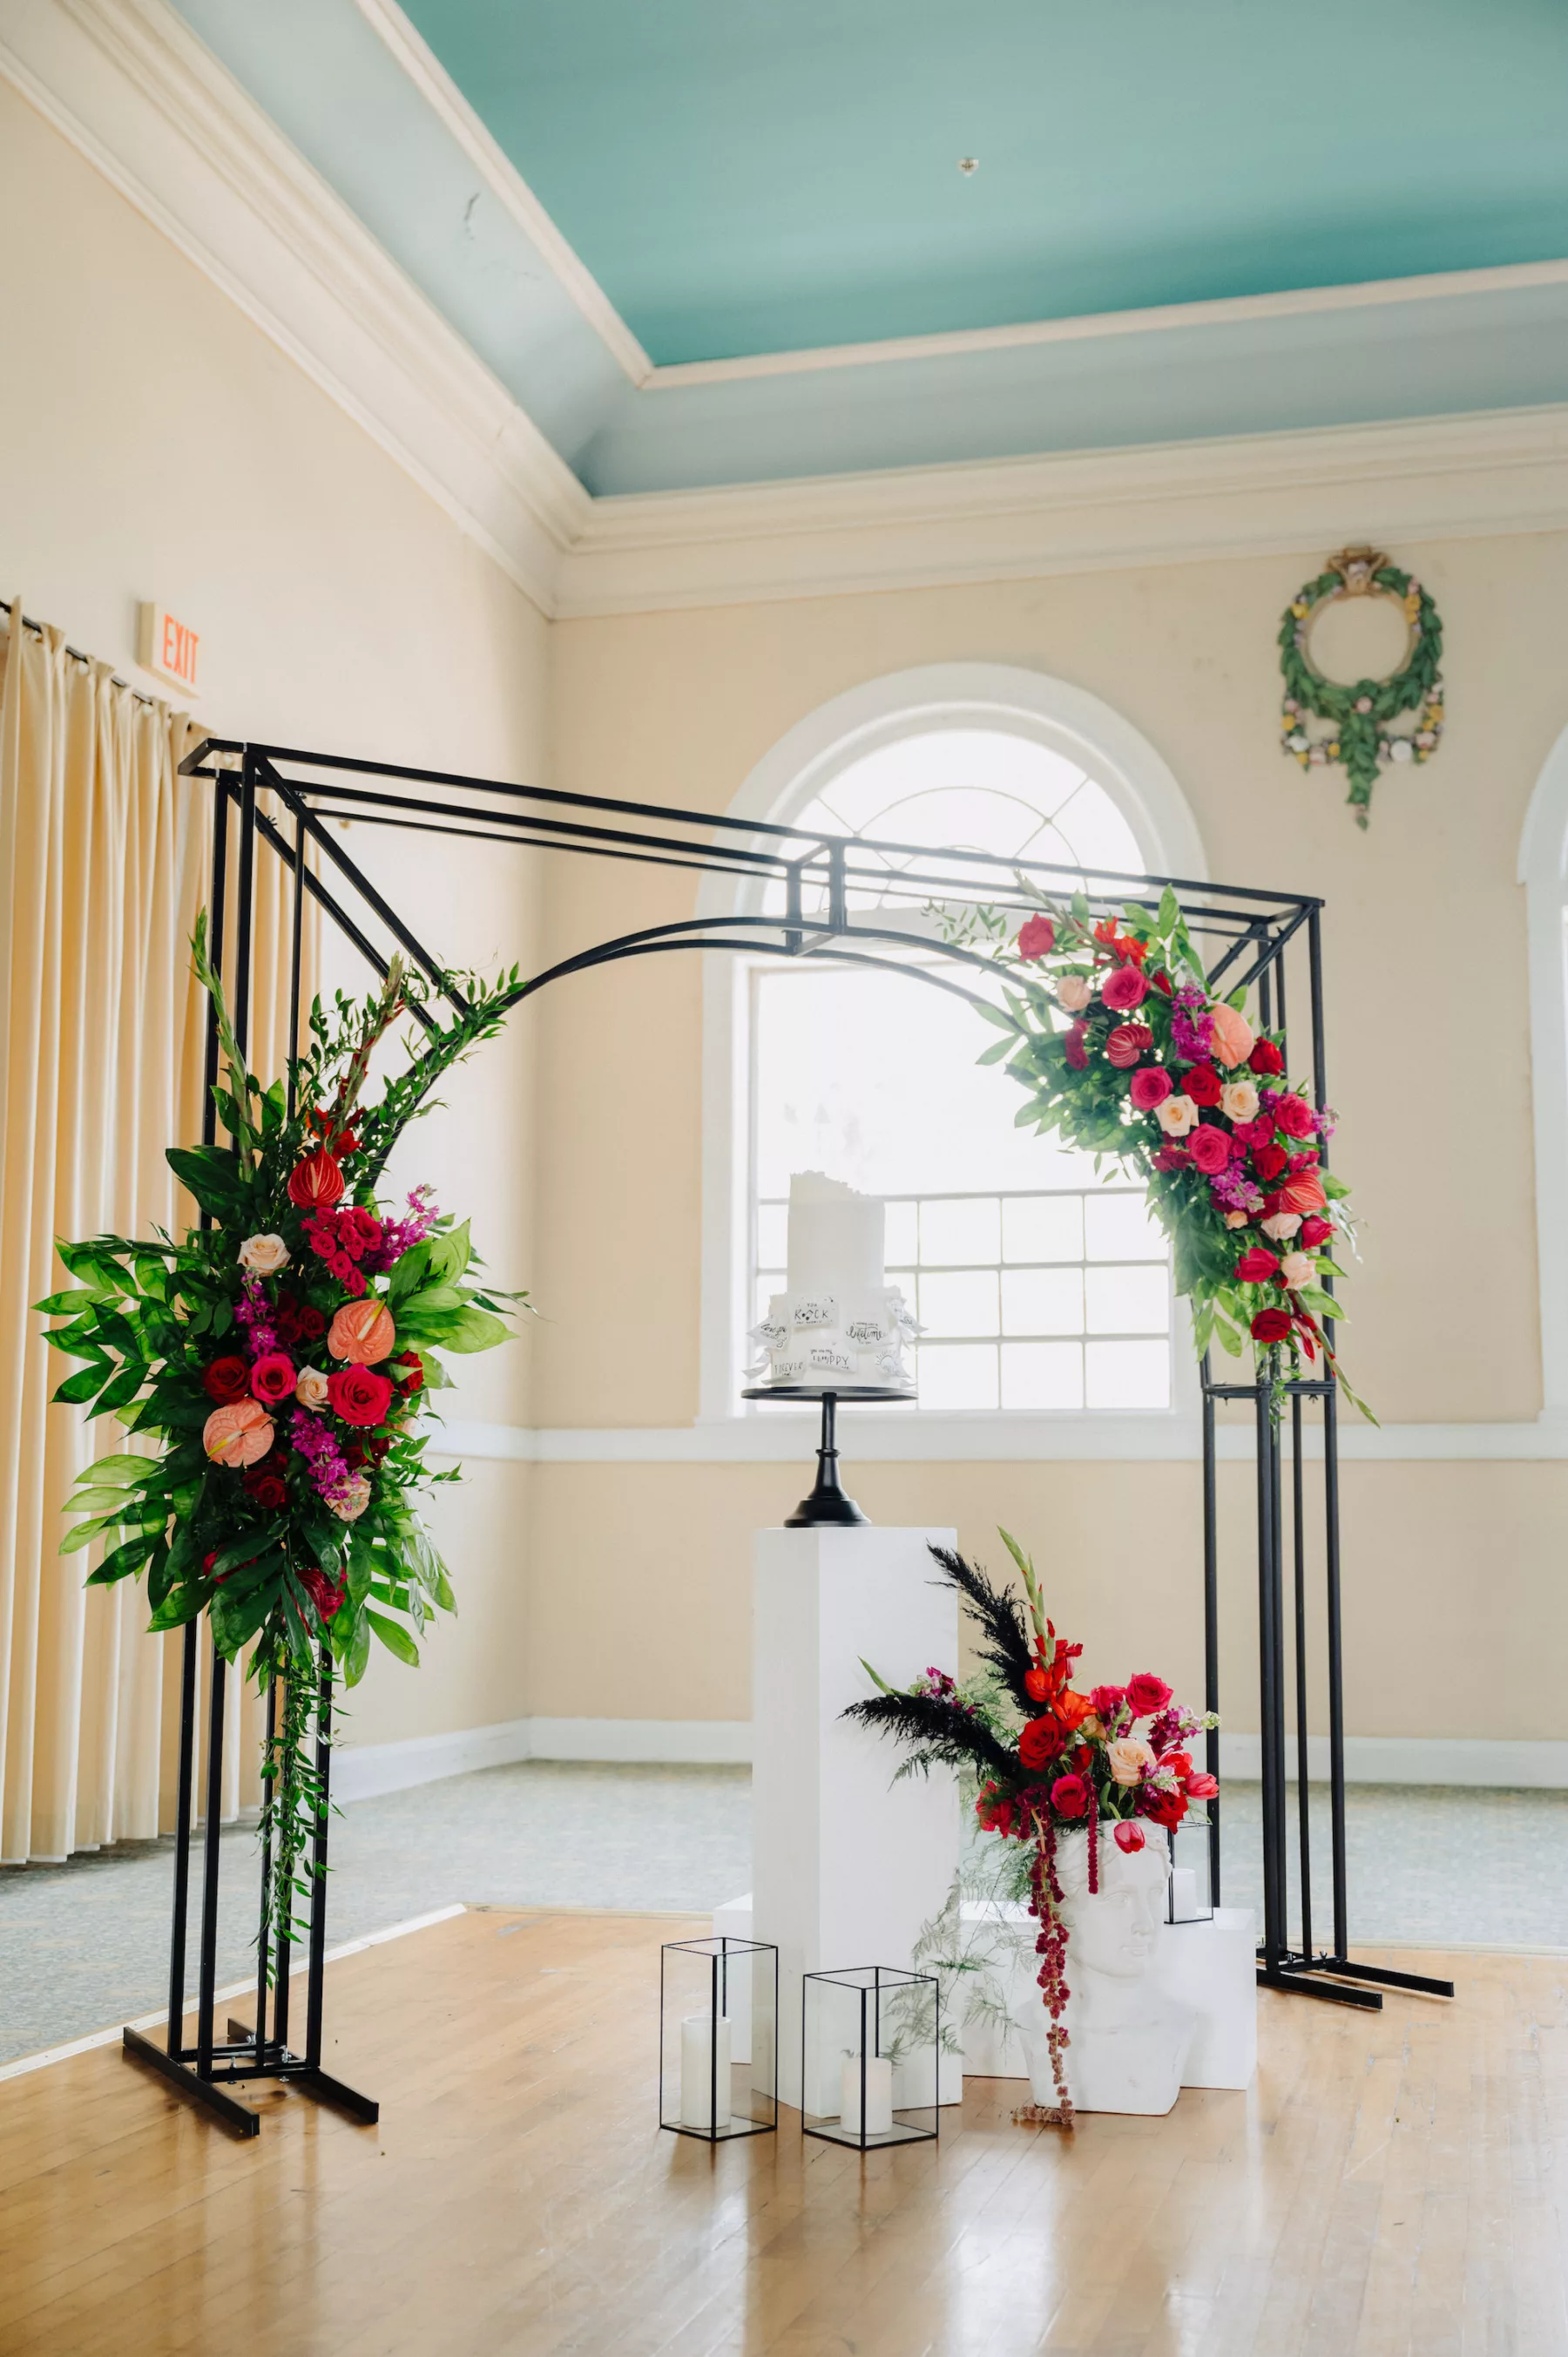 Modern Black Arbor Wedding Cake Table Display Inspiration | Bold Floral Arrangement with Pink and Red Roses, Red Anthurium, Pink Stock Flowers, and Greenery | Tampa Bay Florist Save The Date Florida